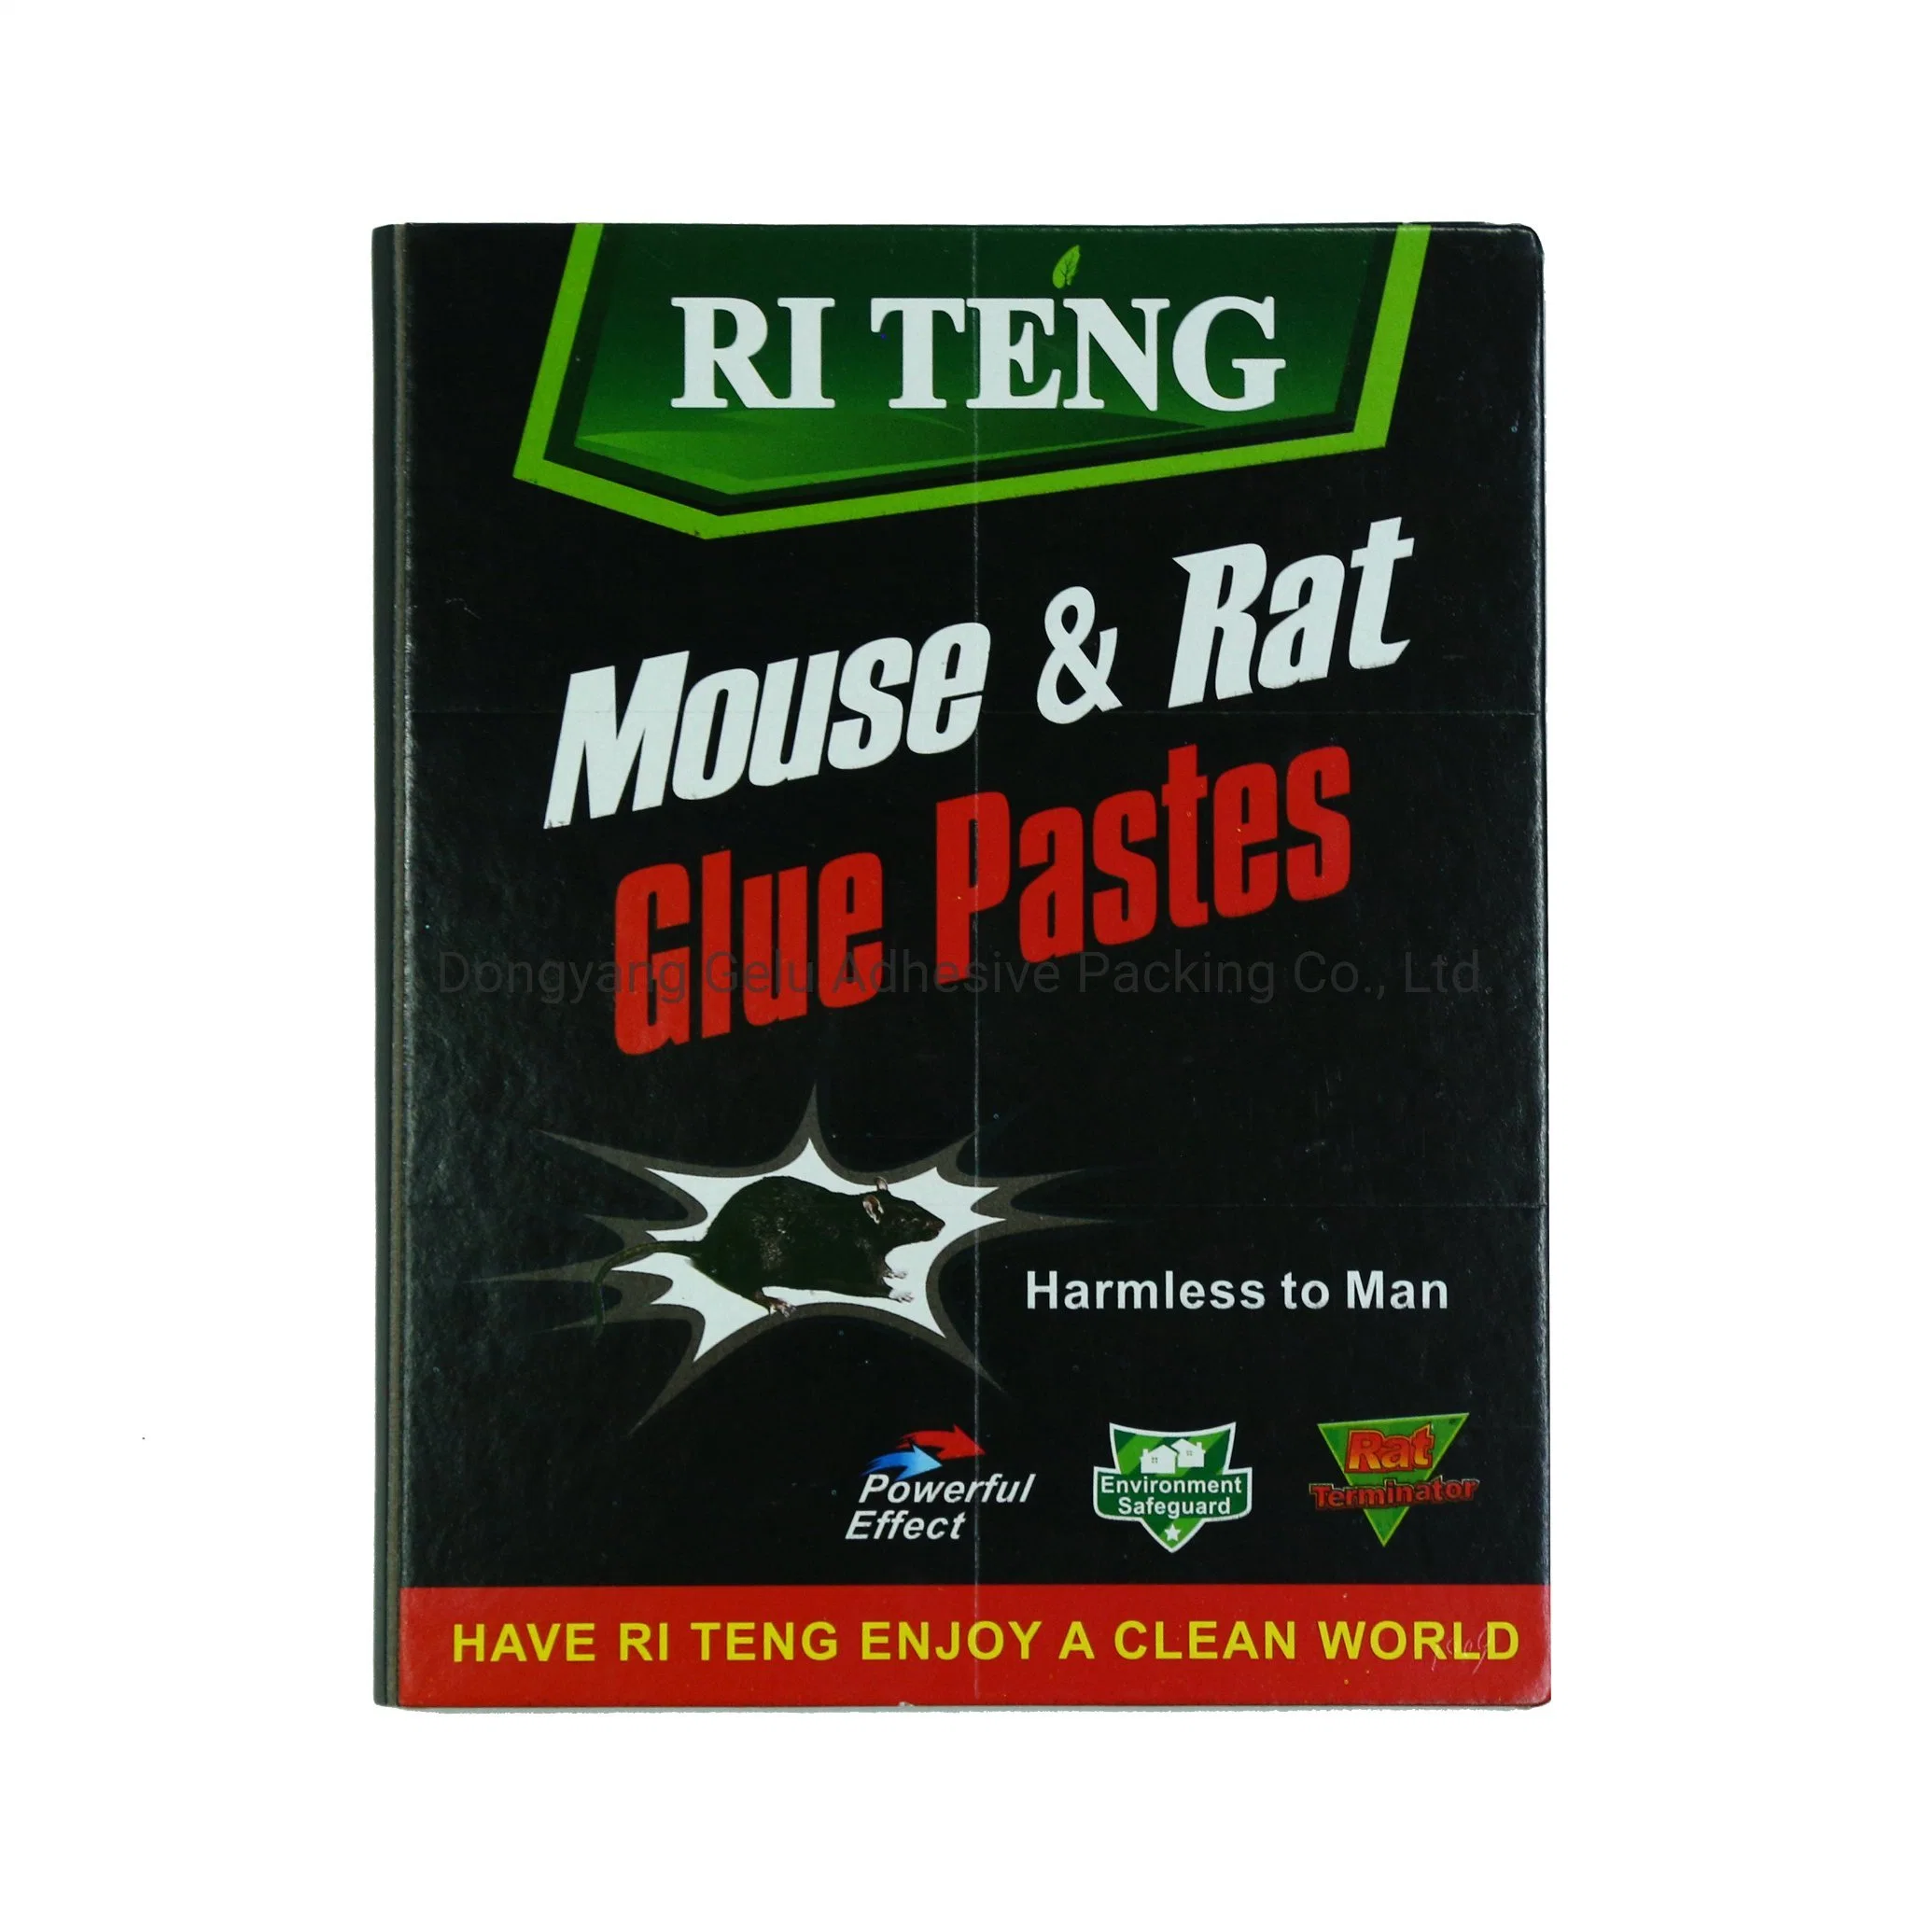 Fly Paper Insect Ants Spider Mosquito Mouse Glue Roach Killer Cockroach House Trap